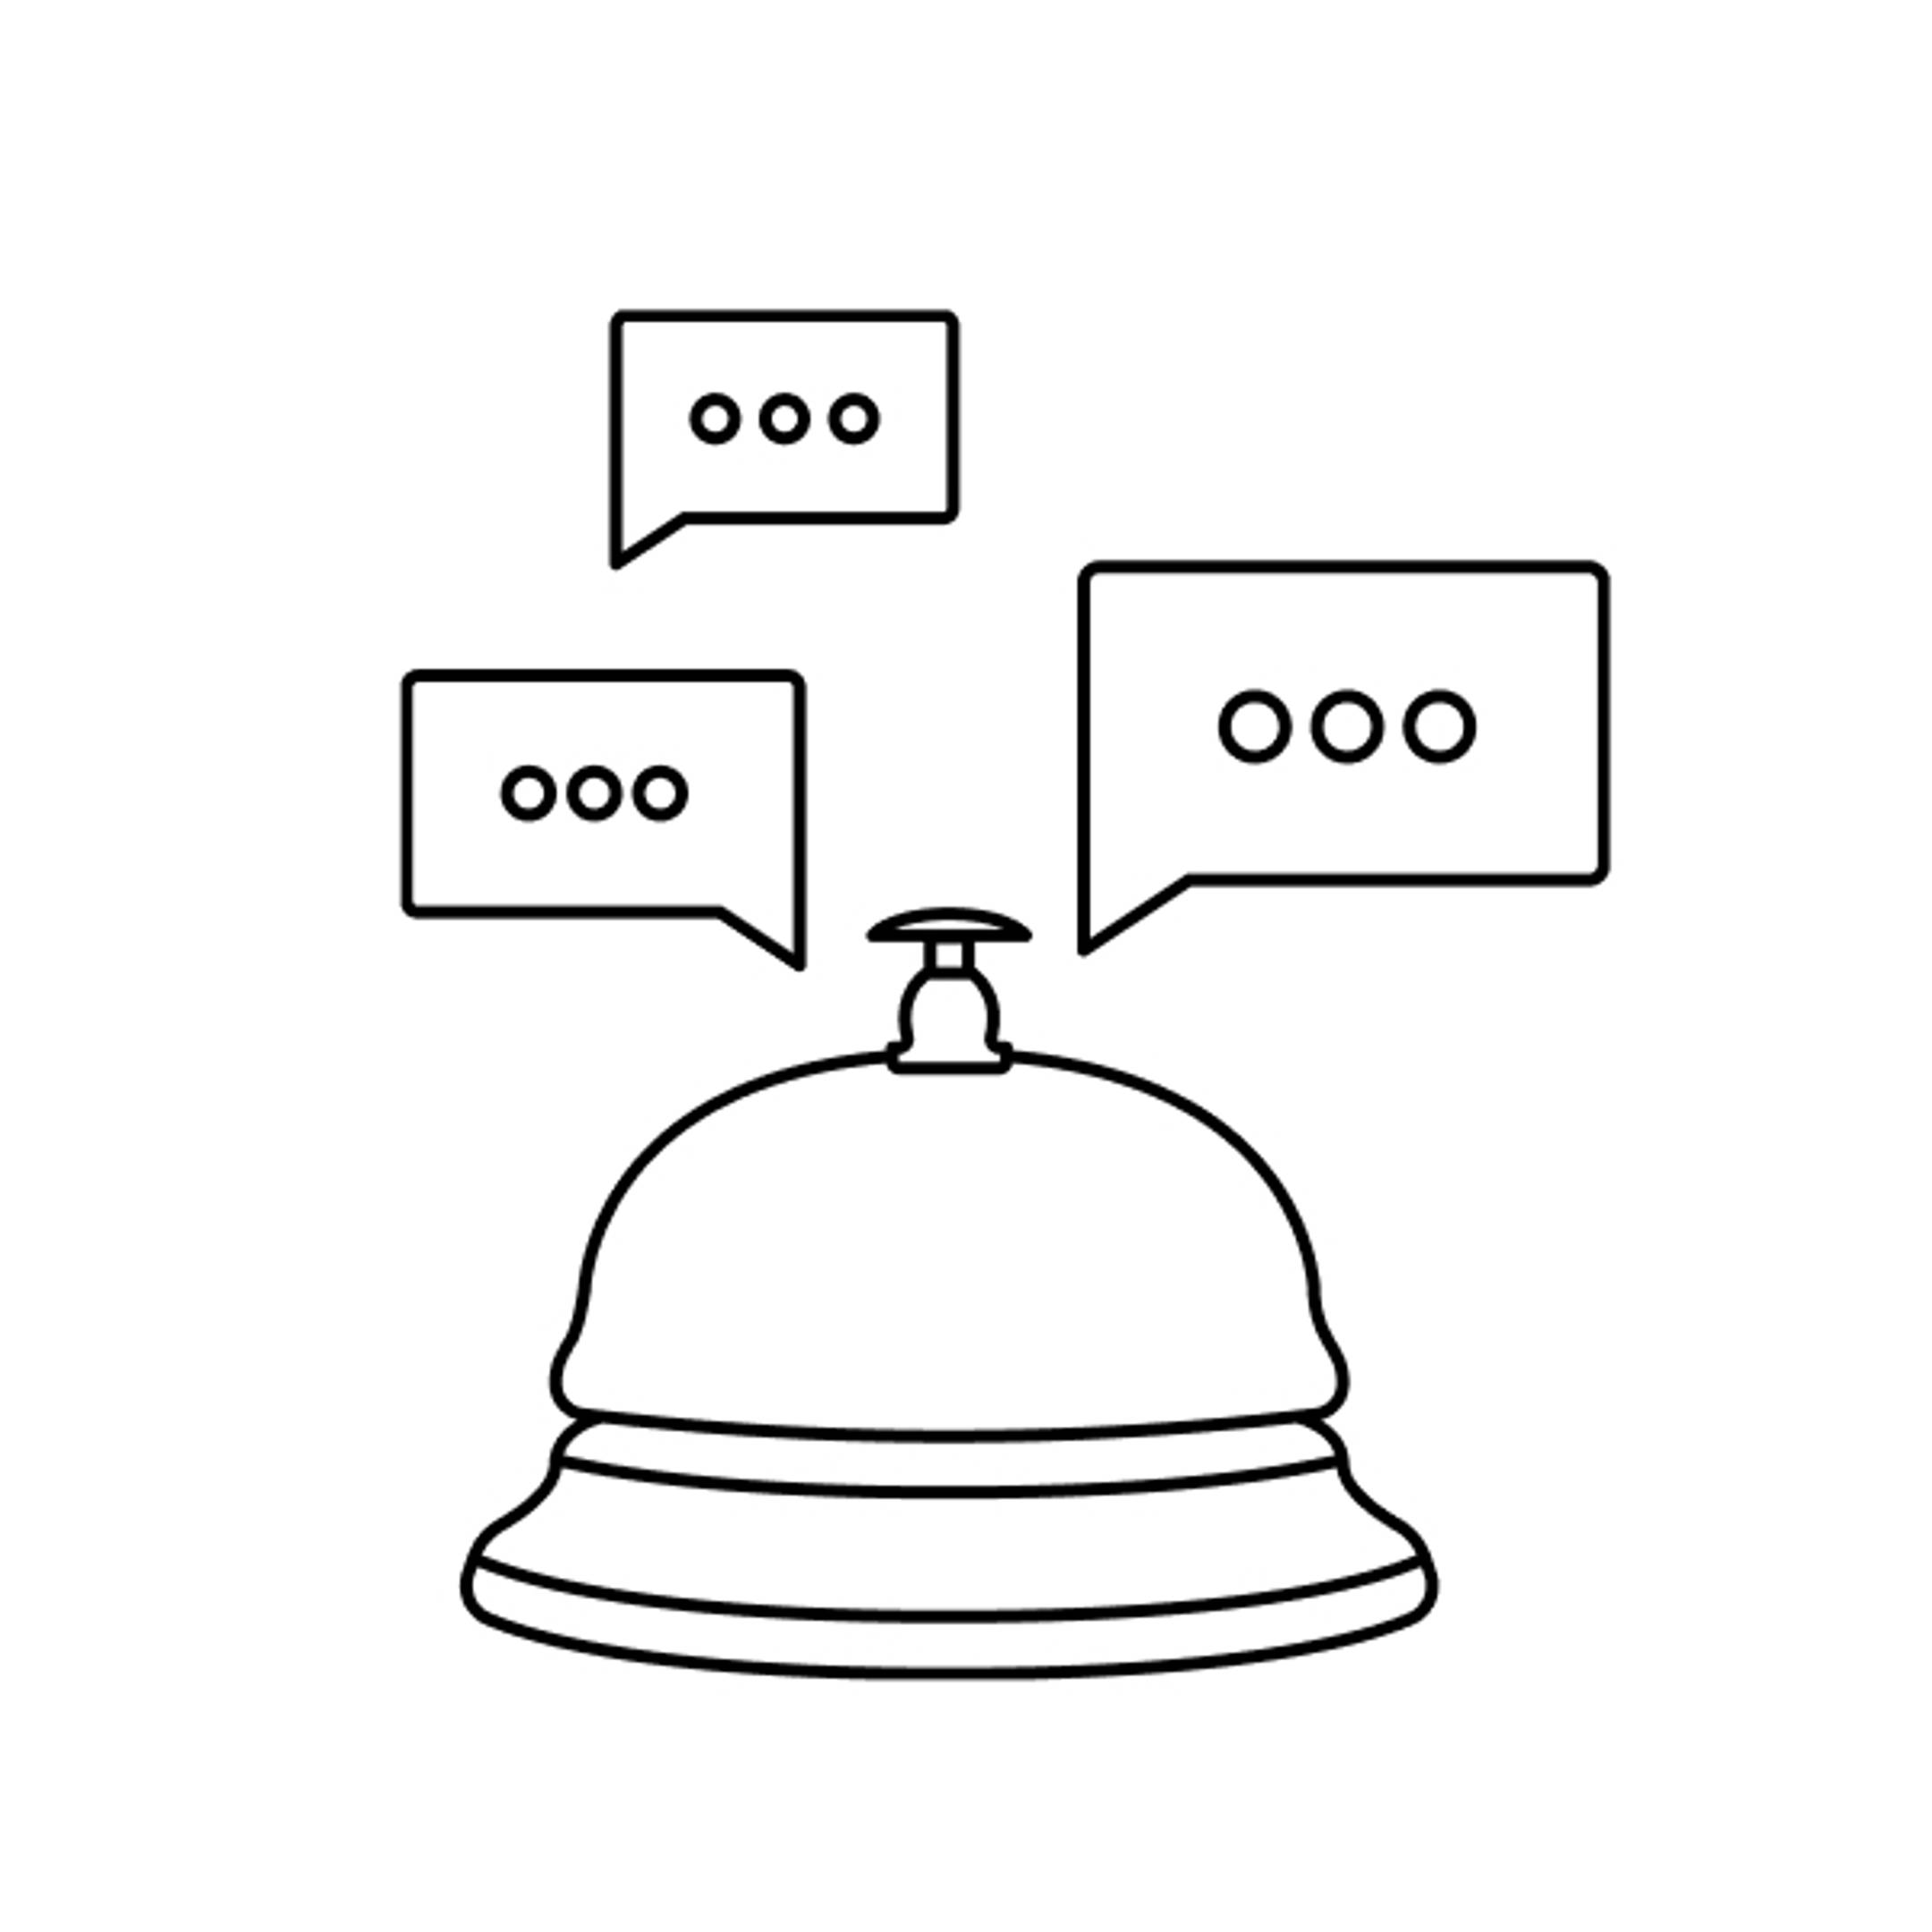 Animated drawing of a service bell